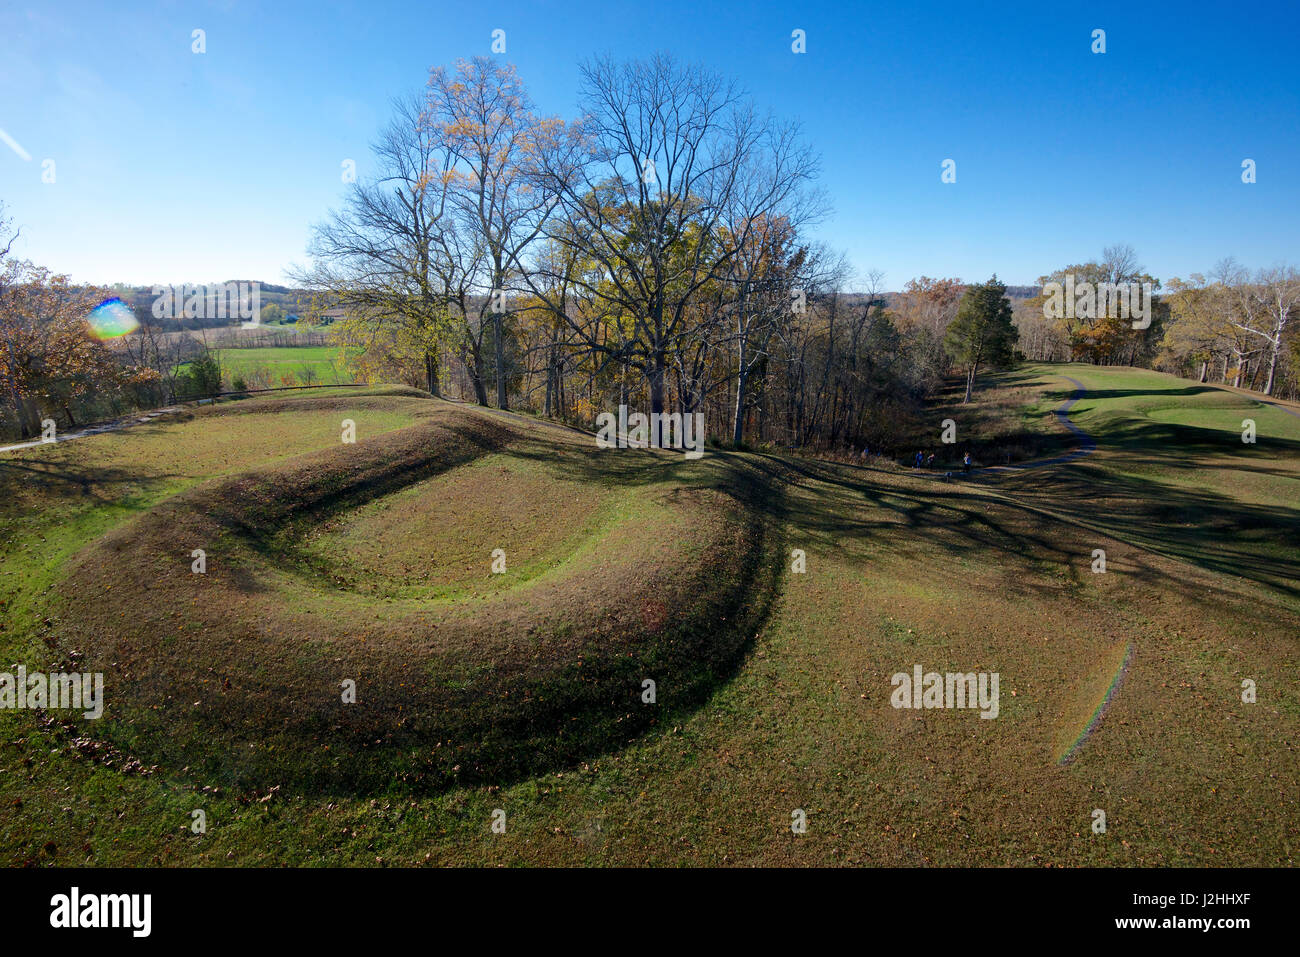 The Great Serpent Mound is a 1,348-foot (411 m) long, three-foot-high prehistoric effigy mound on a plateau, Ohio. It is thought that the loops of the serpent may have astrological alignments with the sun and moon. (Large format sizes available) Stock Photo